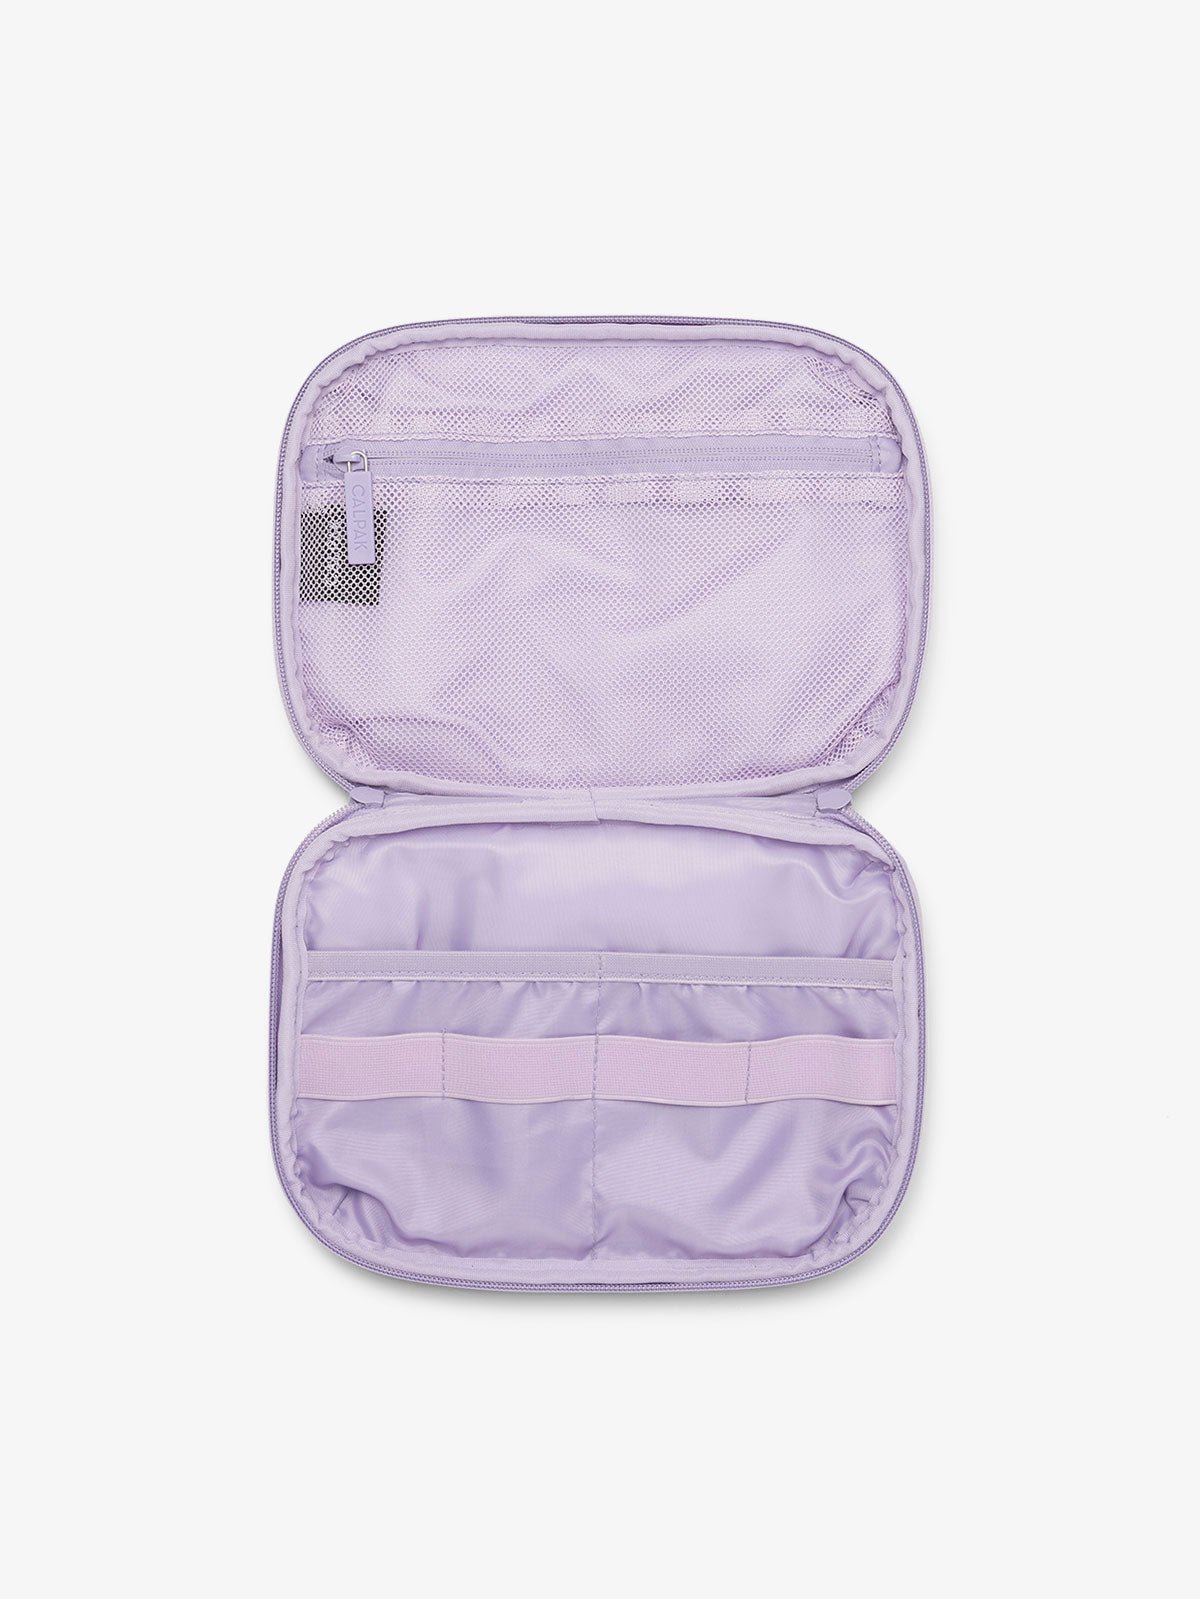 CALPAK tech and electronics organizer for travel in orchid fields lavender